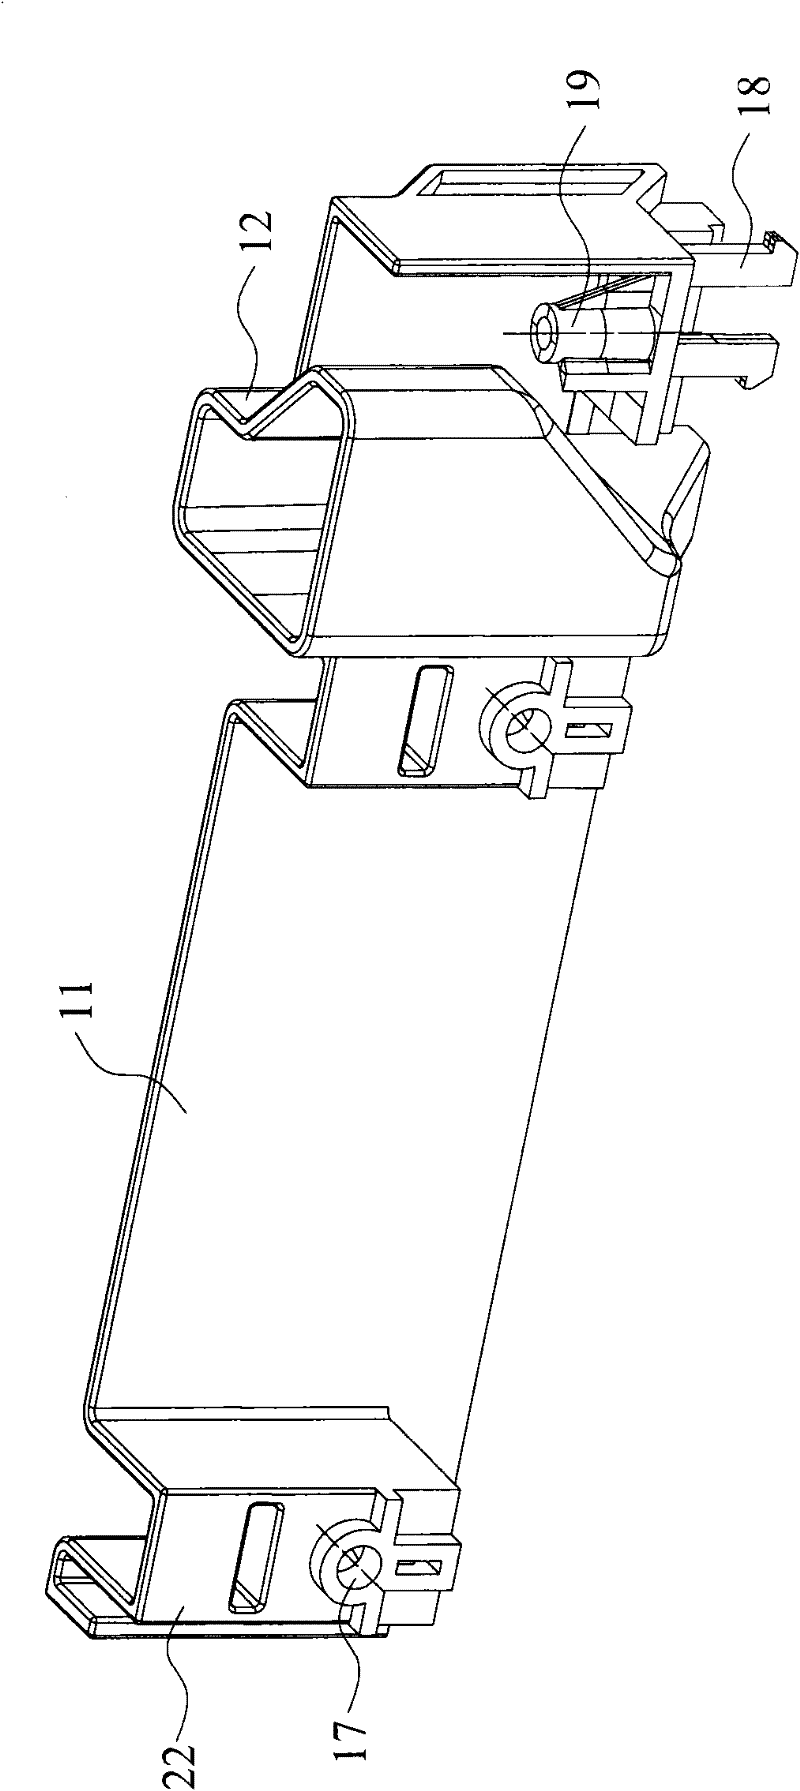 Water retaining device for ice maker of refrigerator